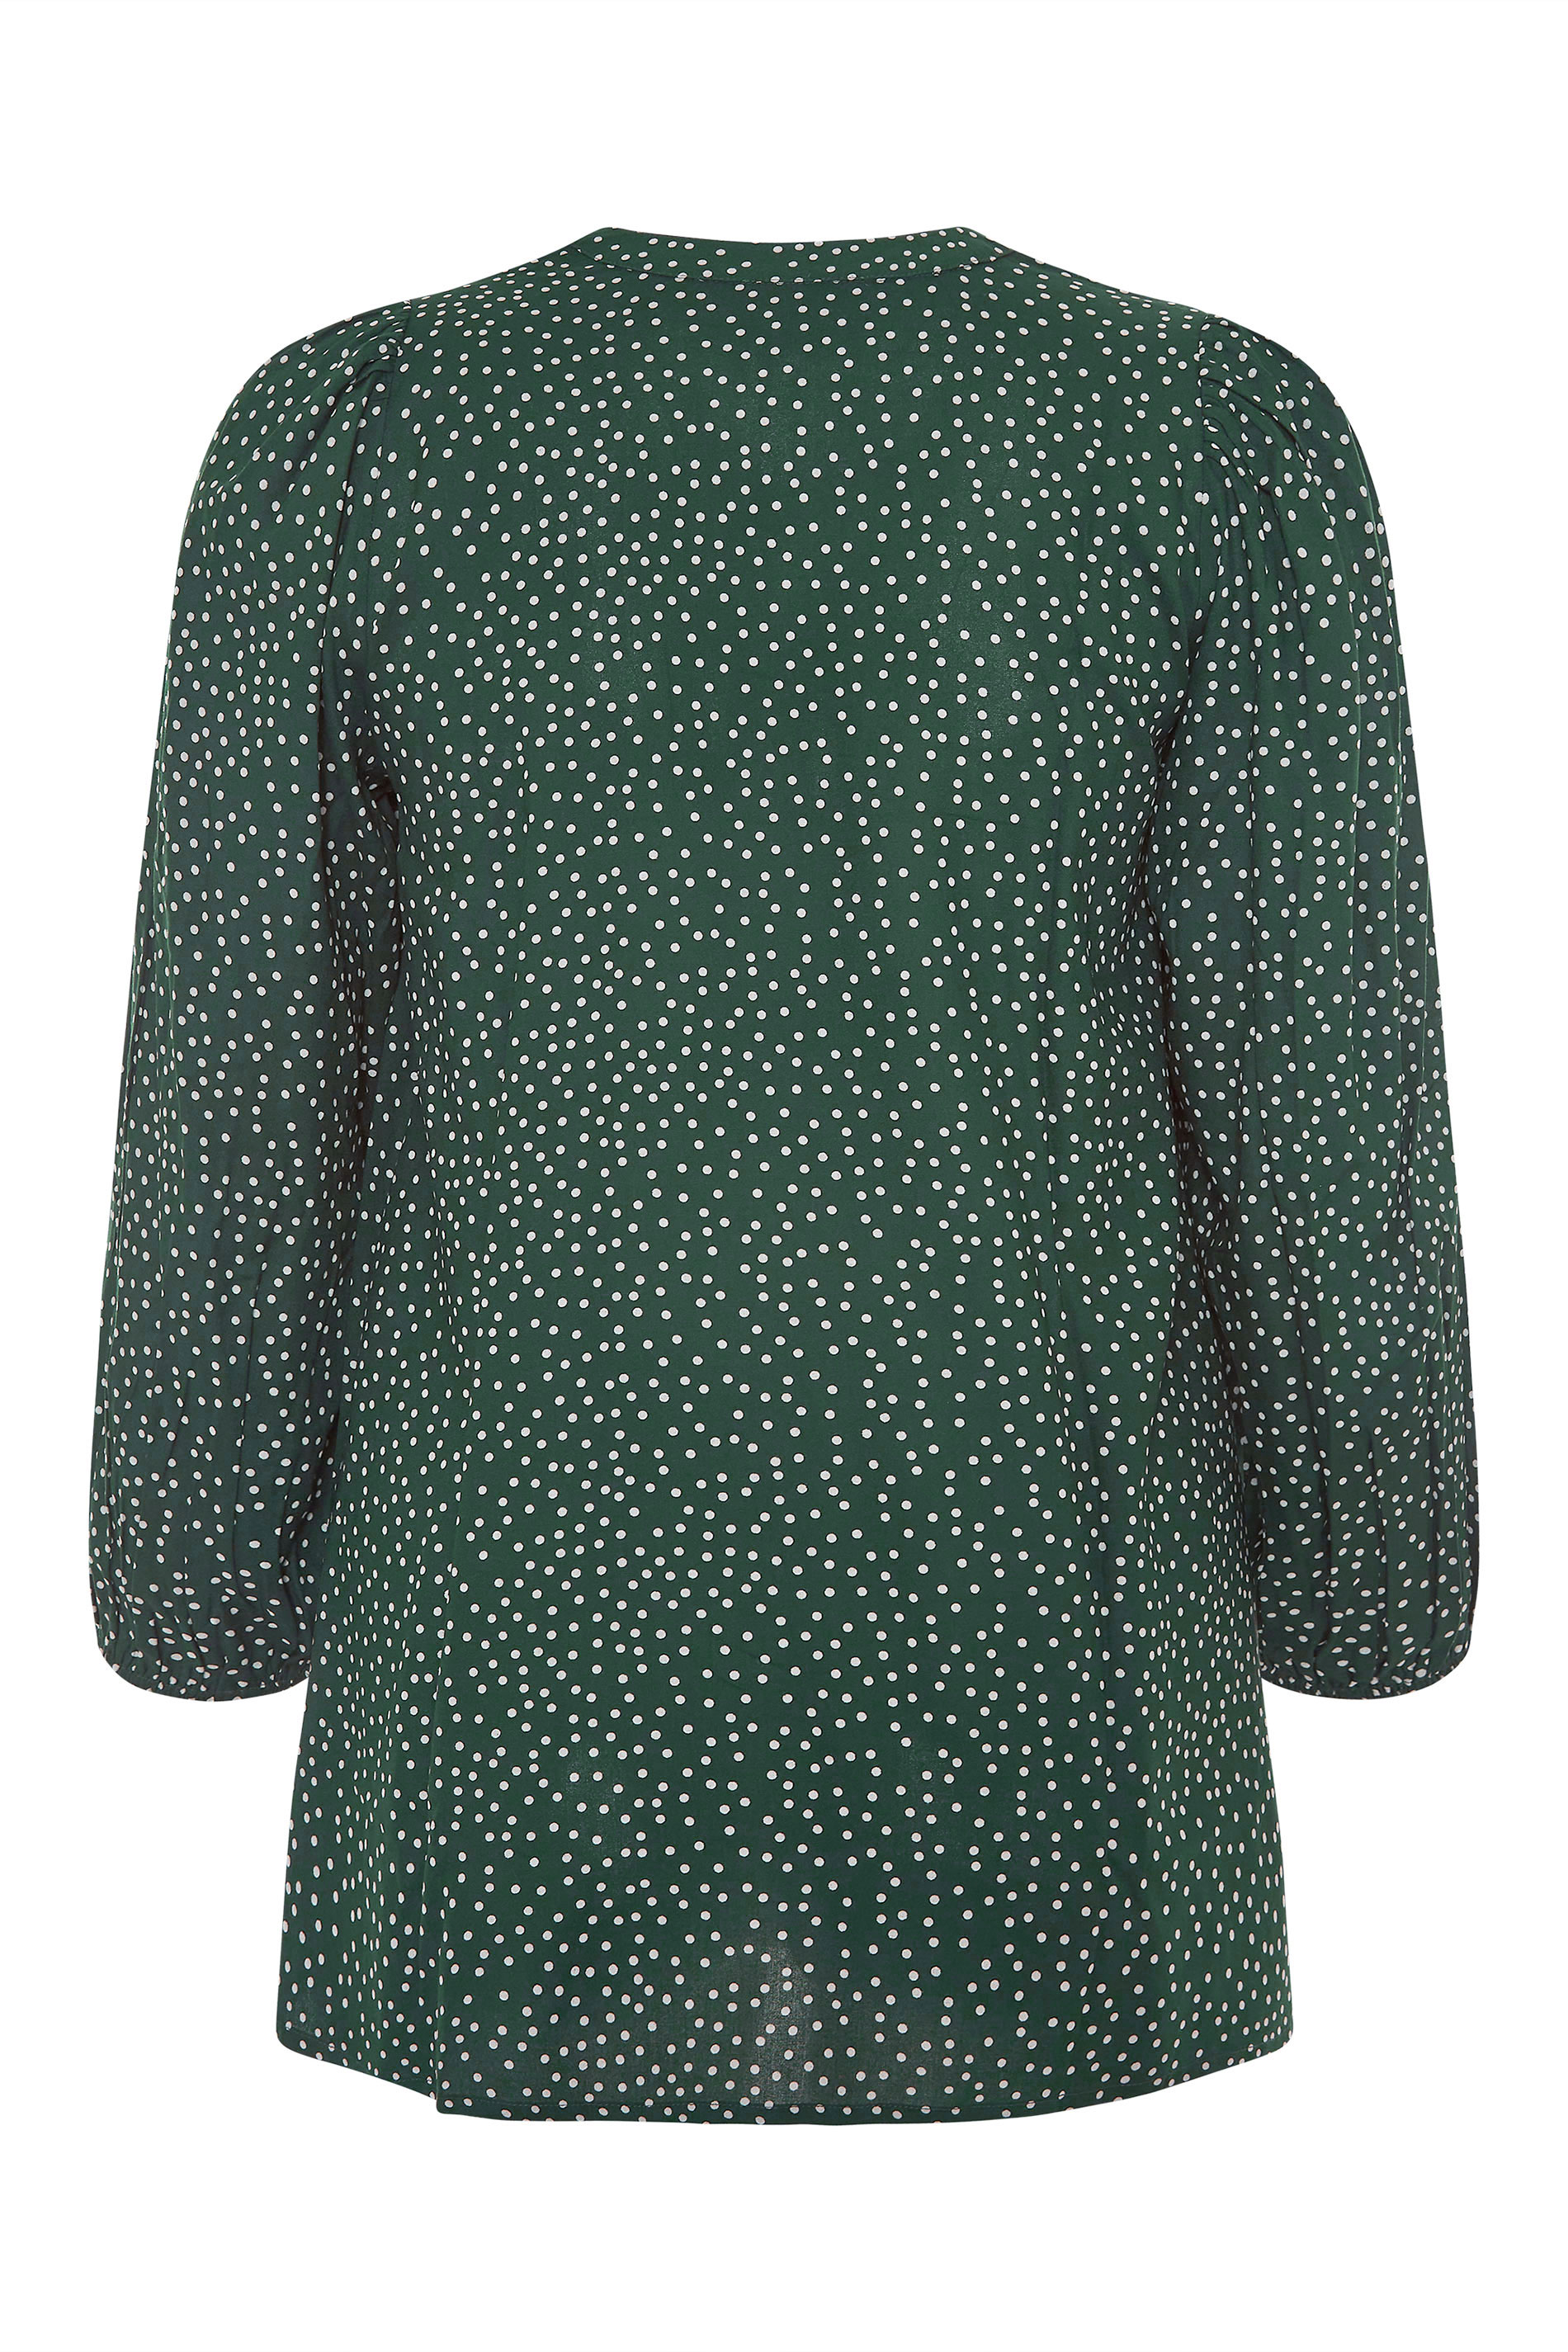 Plus Size YOURS LONDON Green Polka Dot Balloon Sleeve Blouse | Yours ...